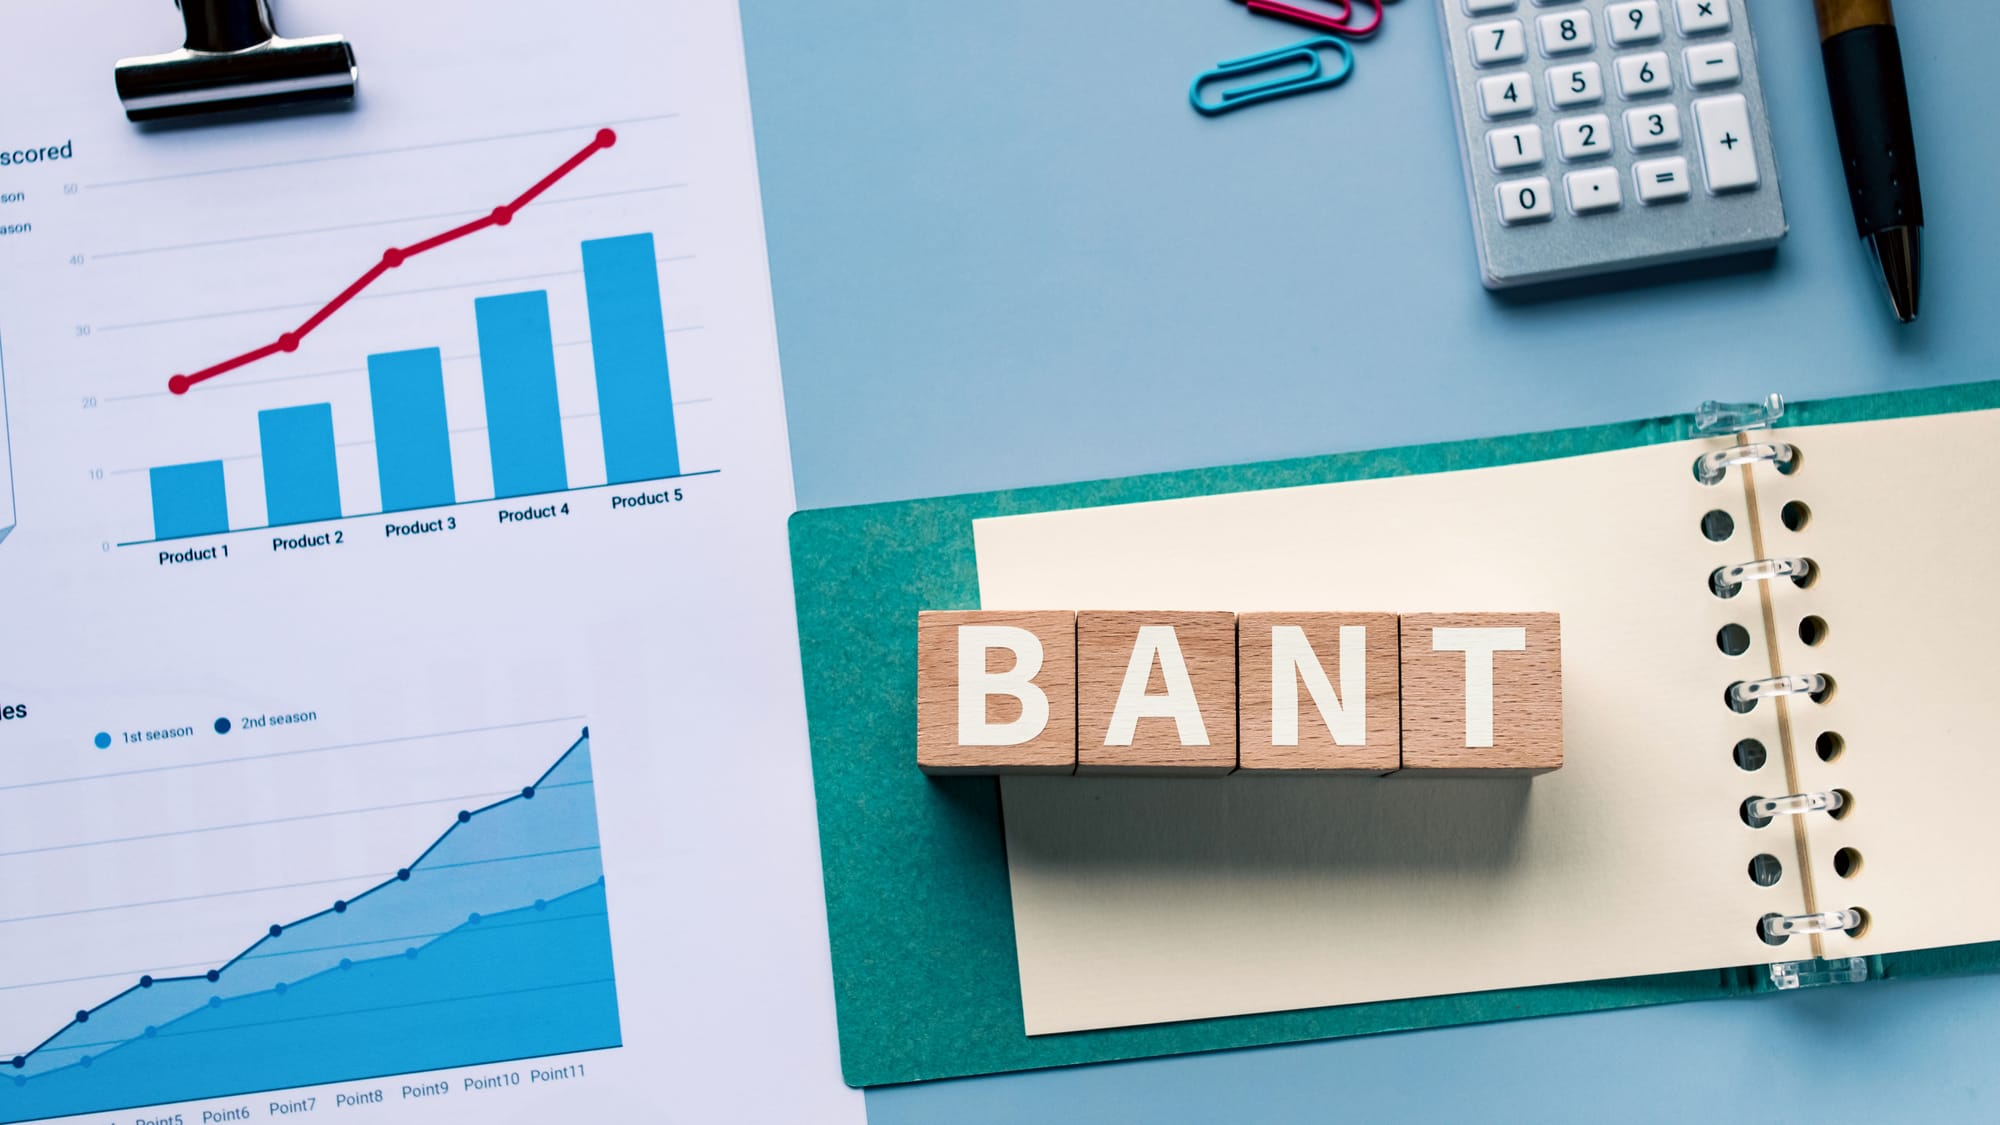 How to Qualify a Sales Lead Using BANT